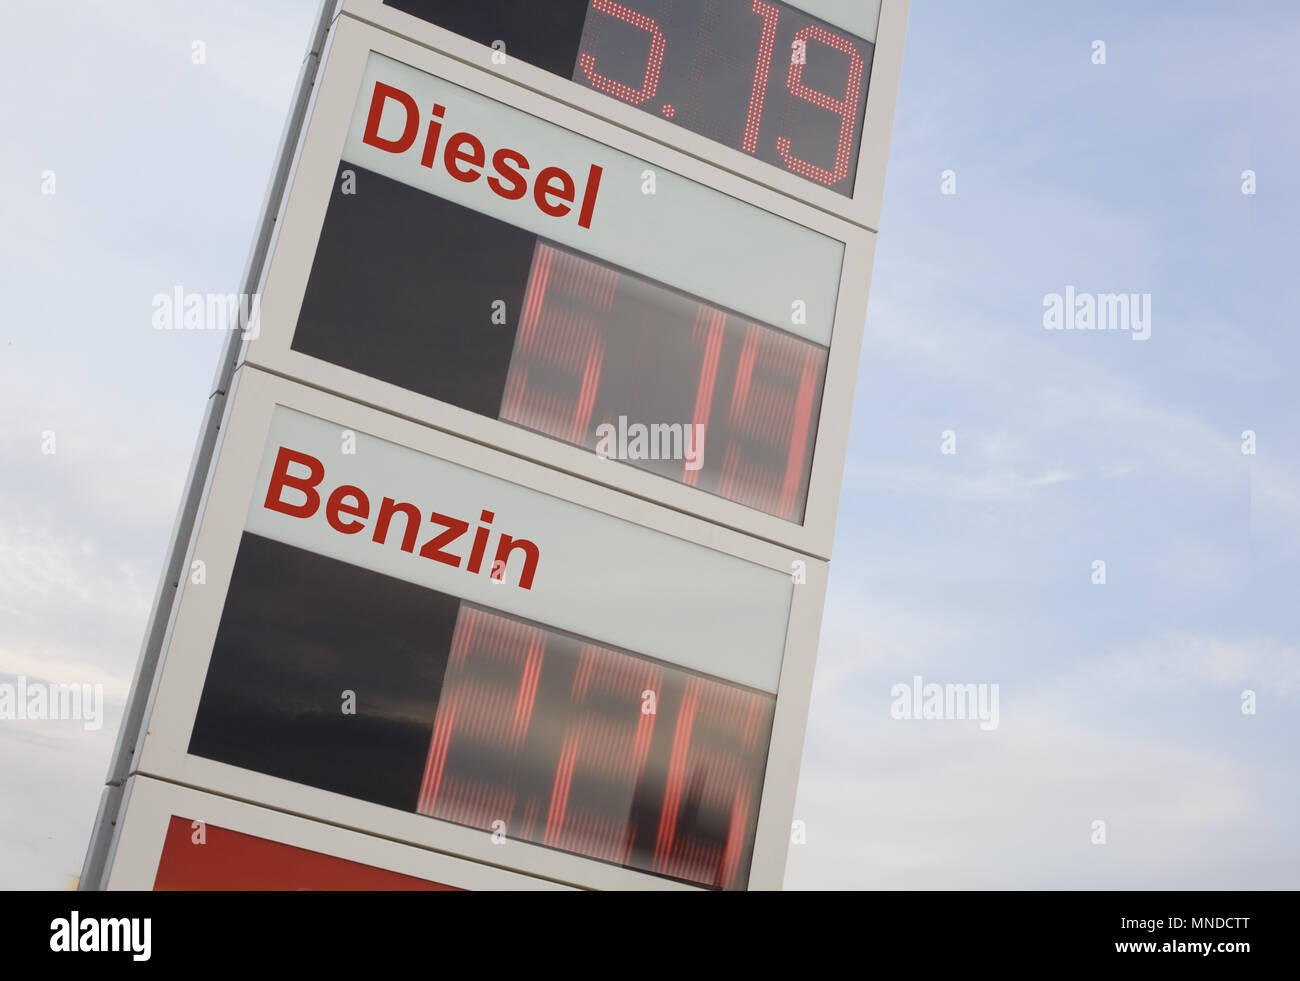 Rising fuel prices. High fuel prices at gas stations. Stock Photo